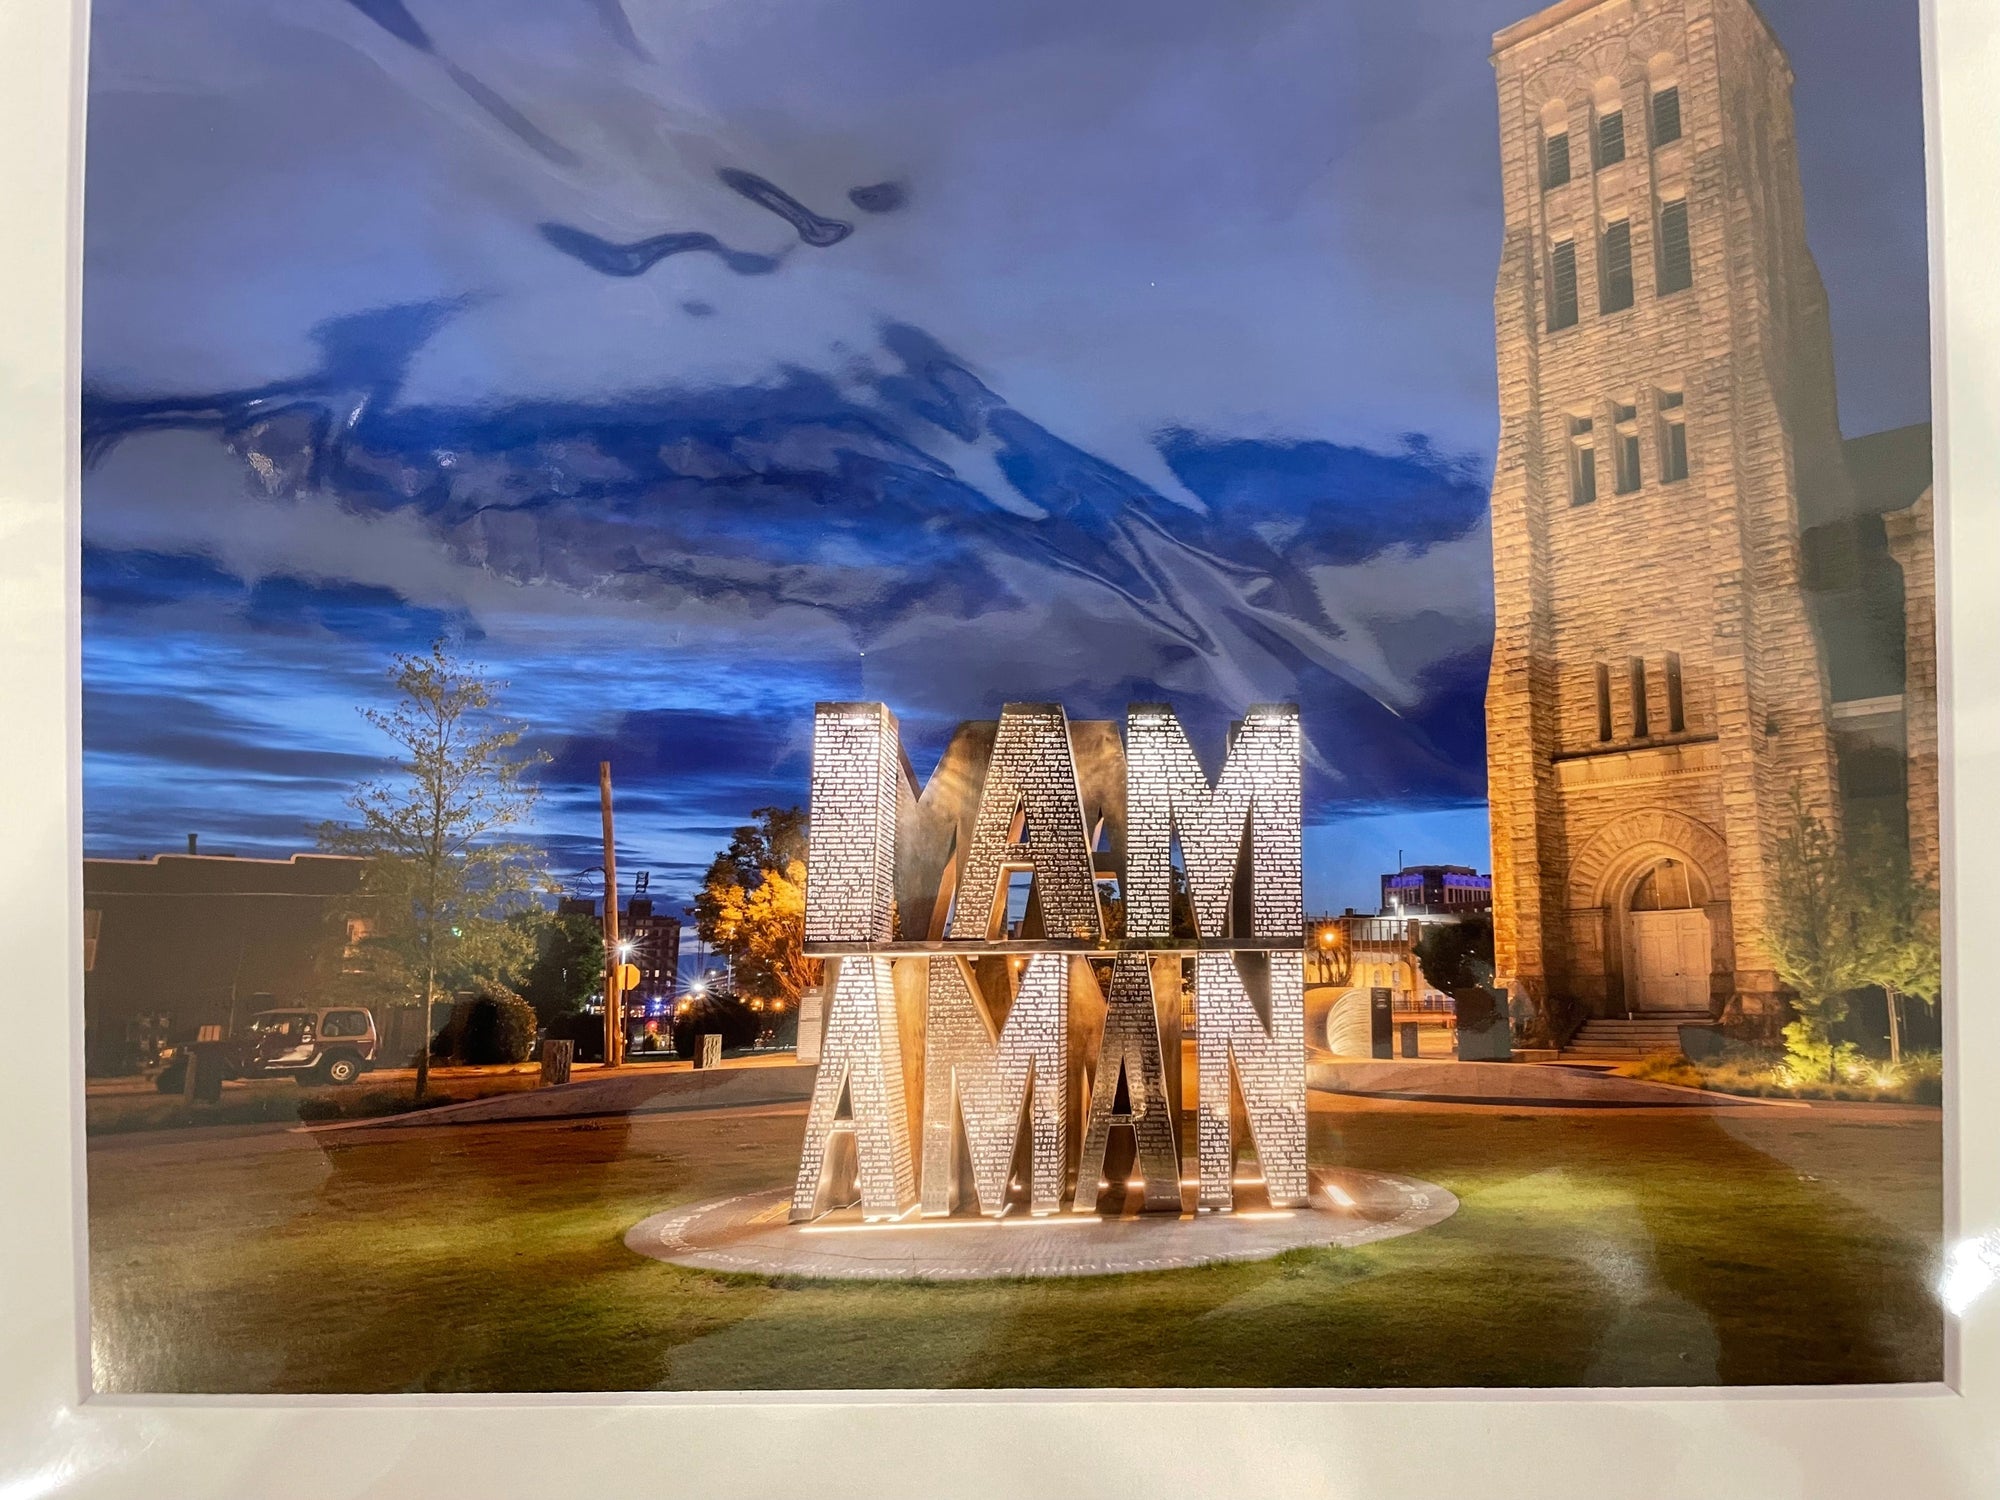 153 'I AM MAN Sculpture at Dusk' Photograph by Mike Baber